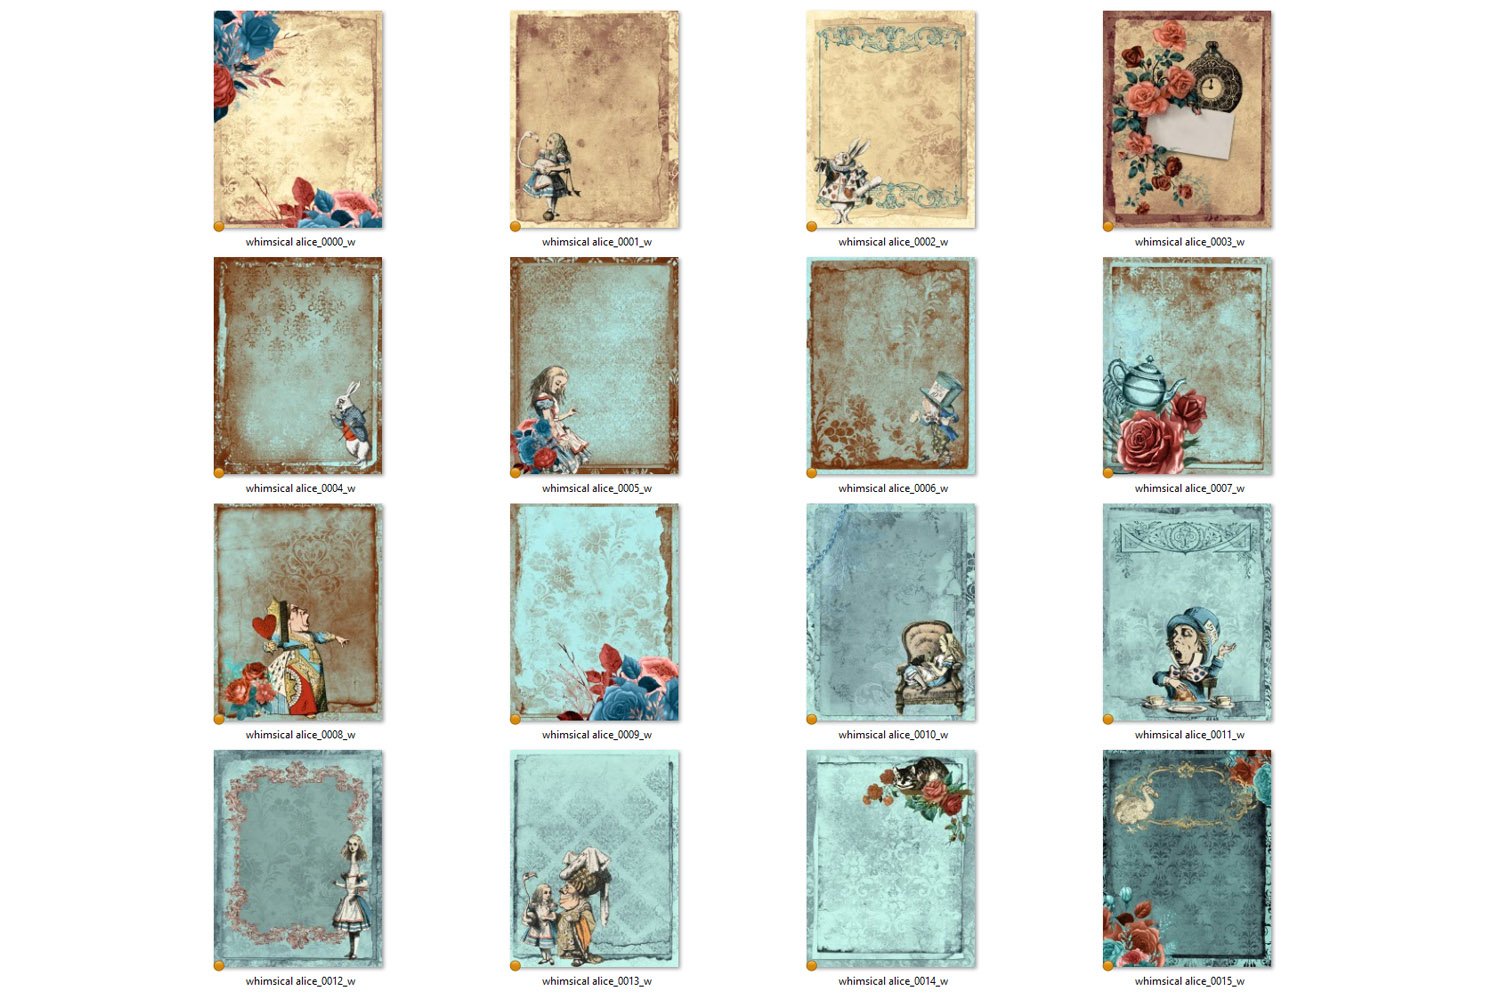 Frames in the style of the fairy tale about Alice.